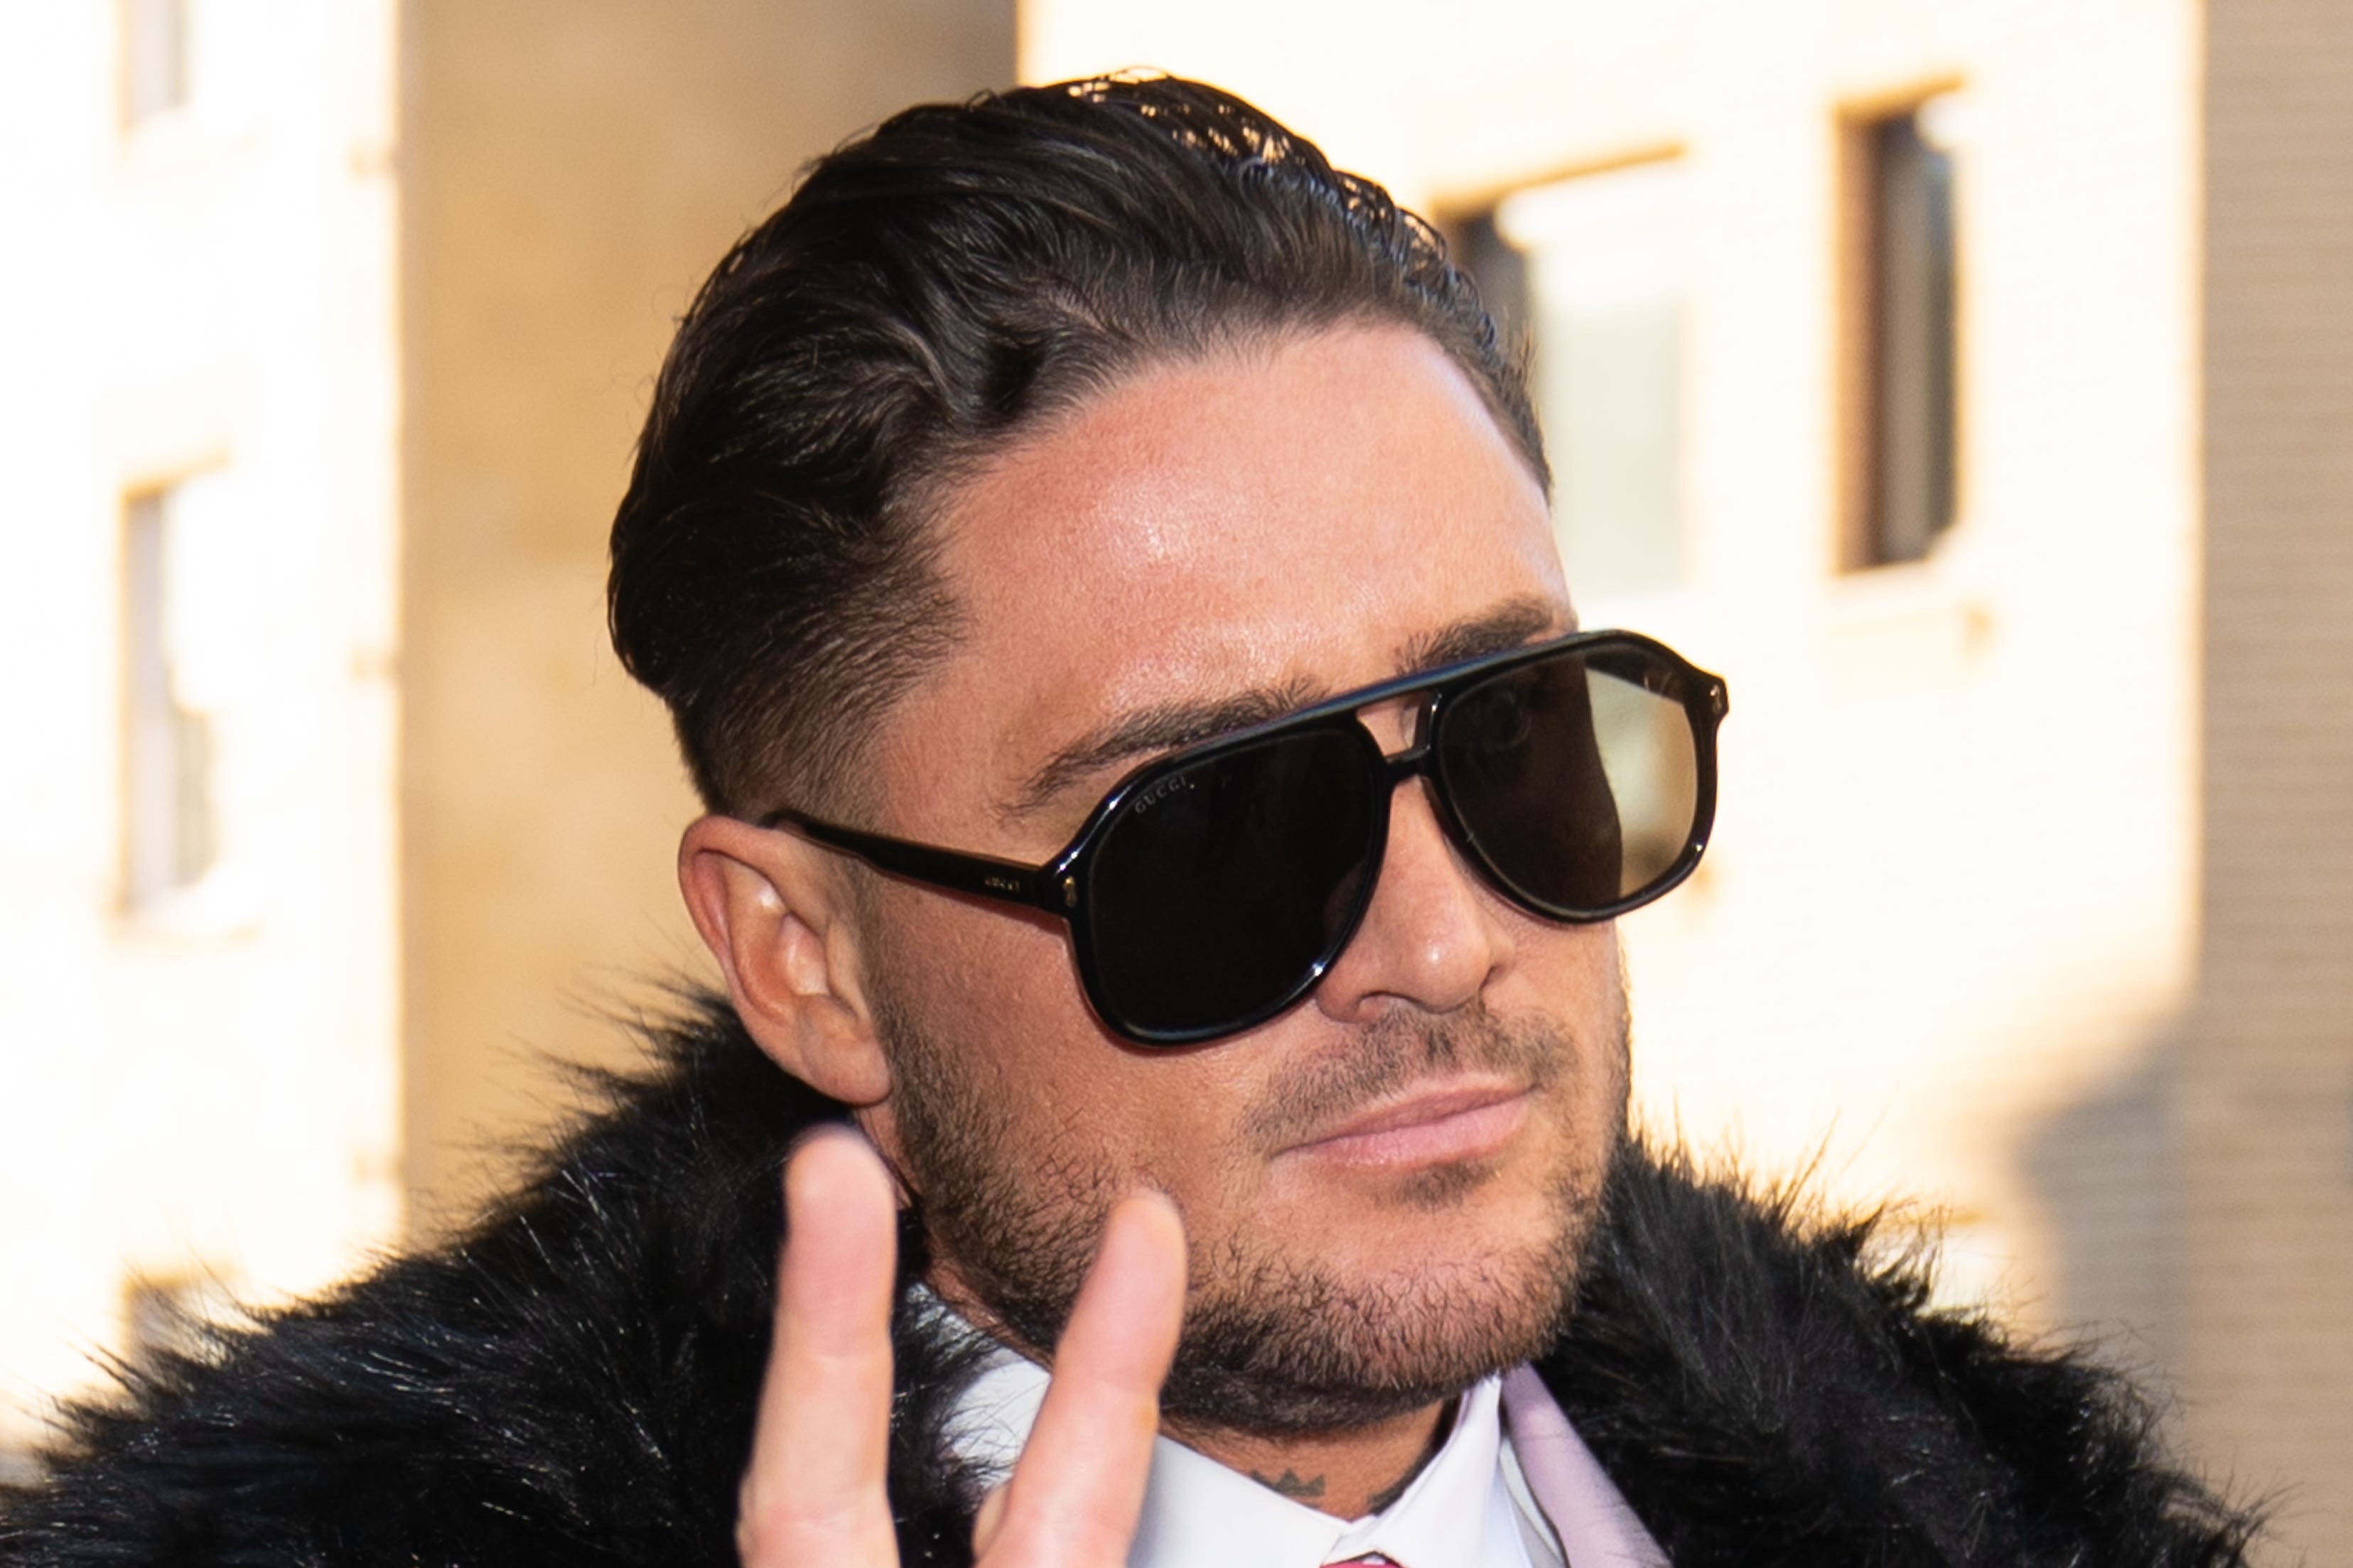 Stephen Bear locked girlfriend out of room while sleeping with someone else The Independent